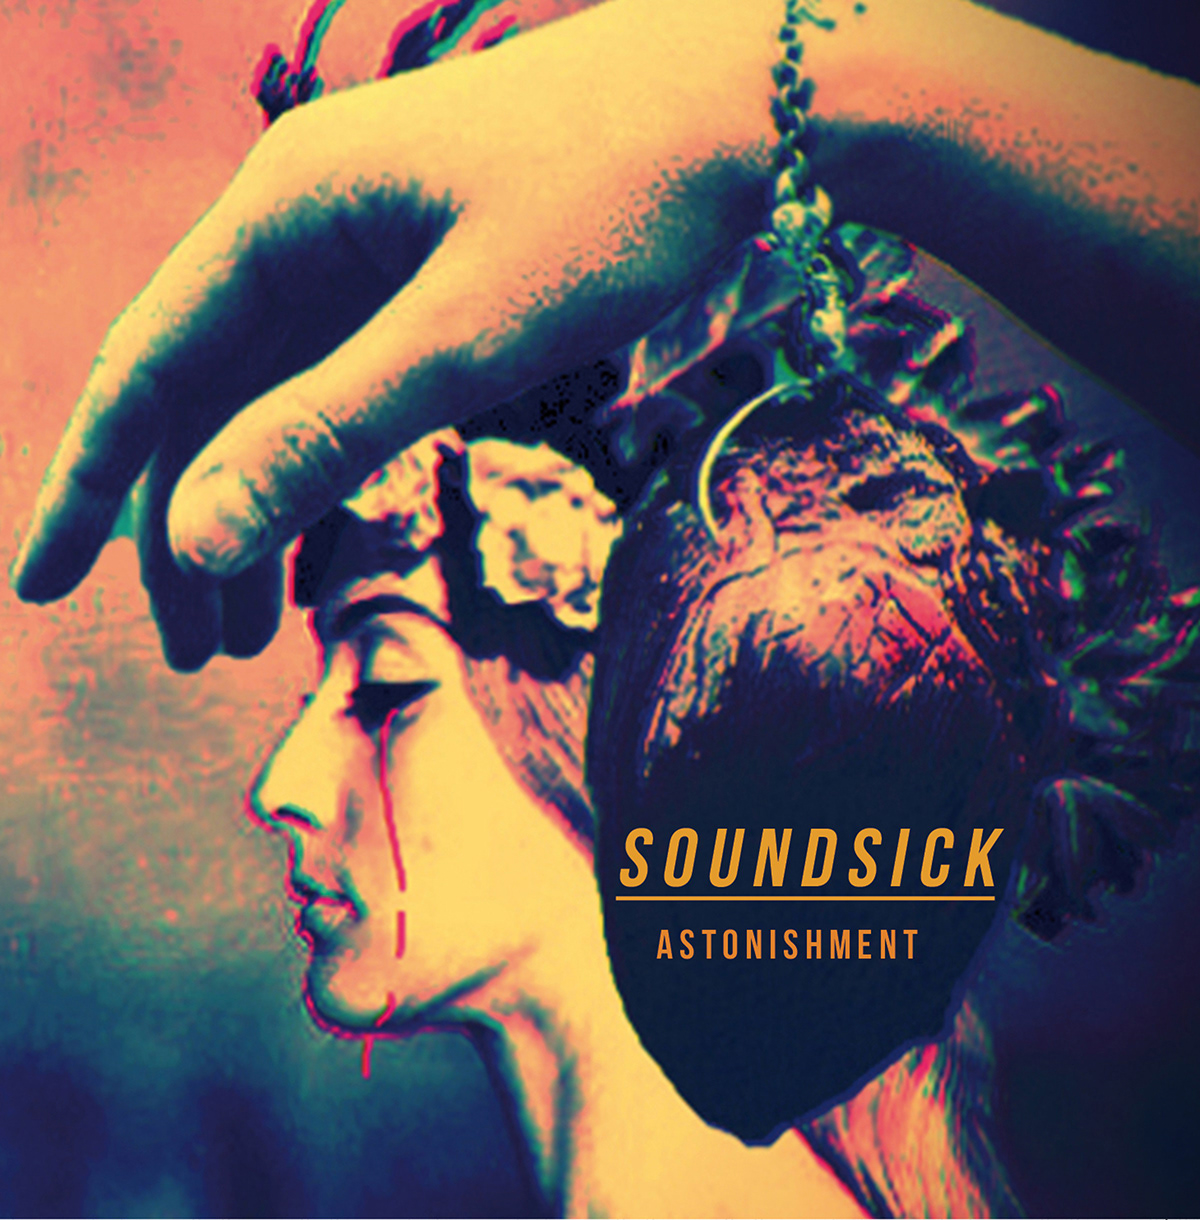 soundsick cover rock psychedelic fabriano marche Italy